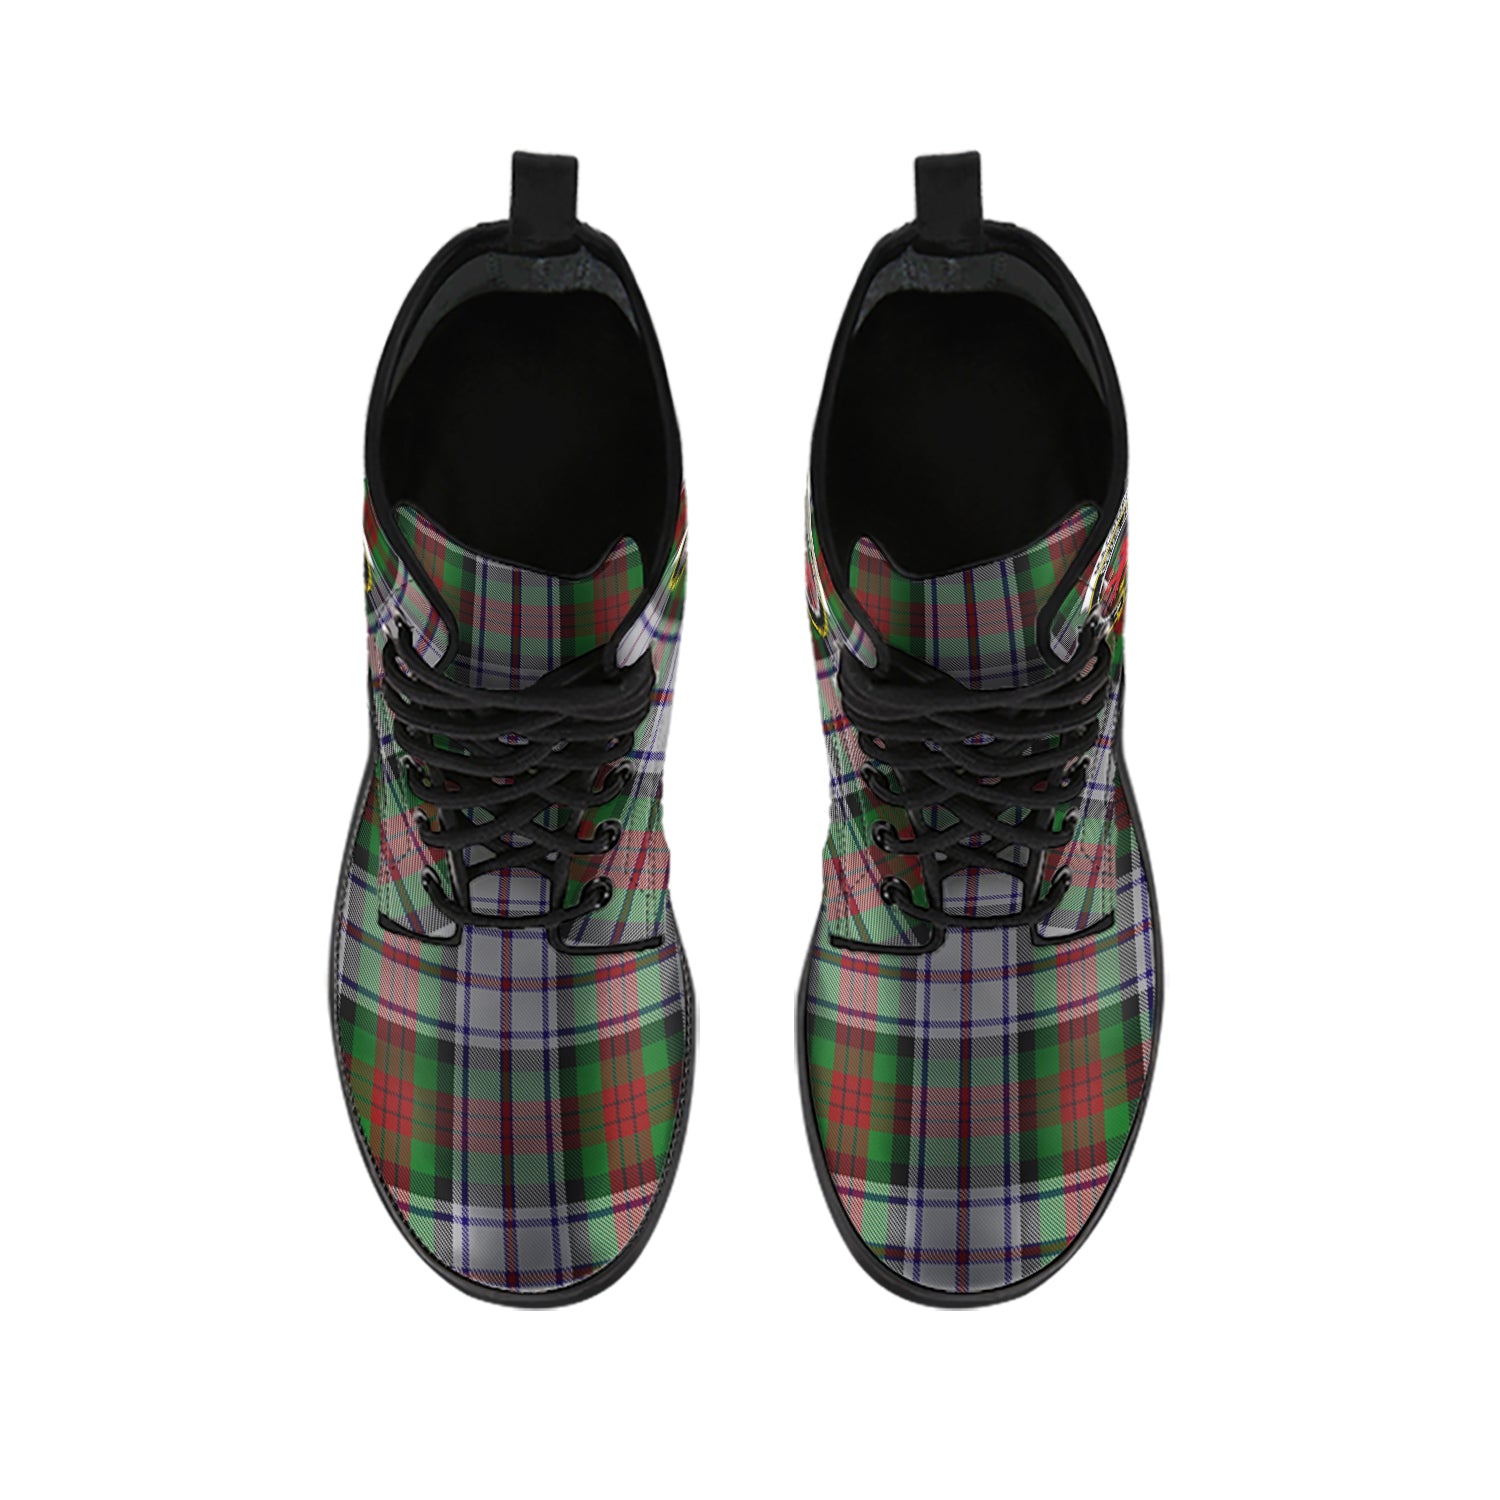 macduff-dress-tartan-leather-boots-with-family-crest